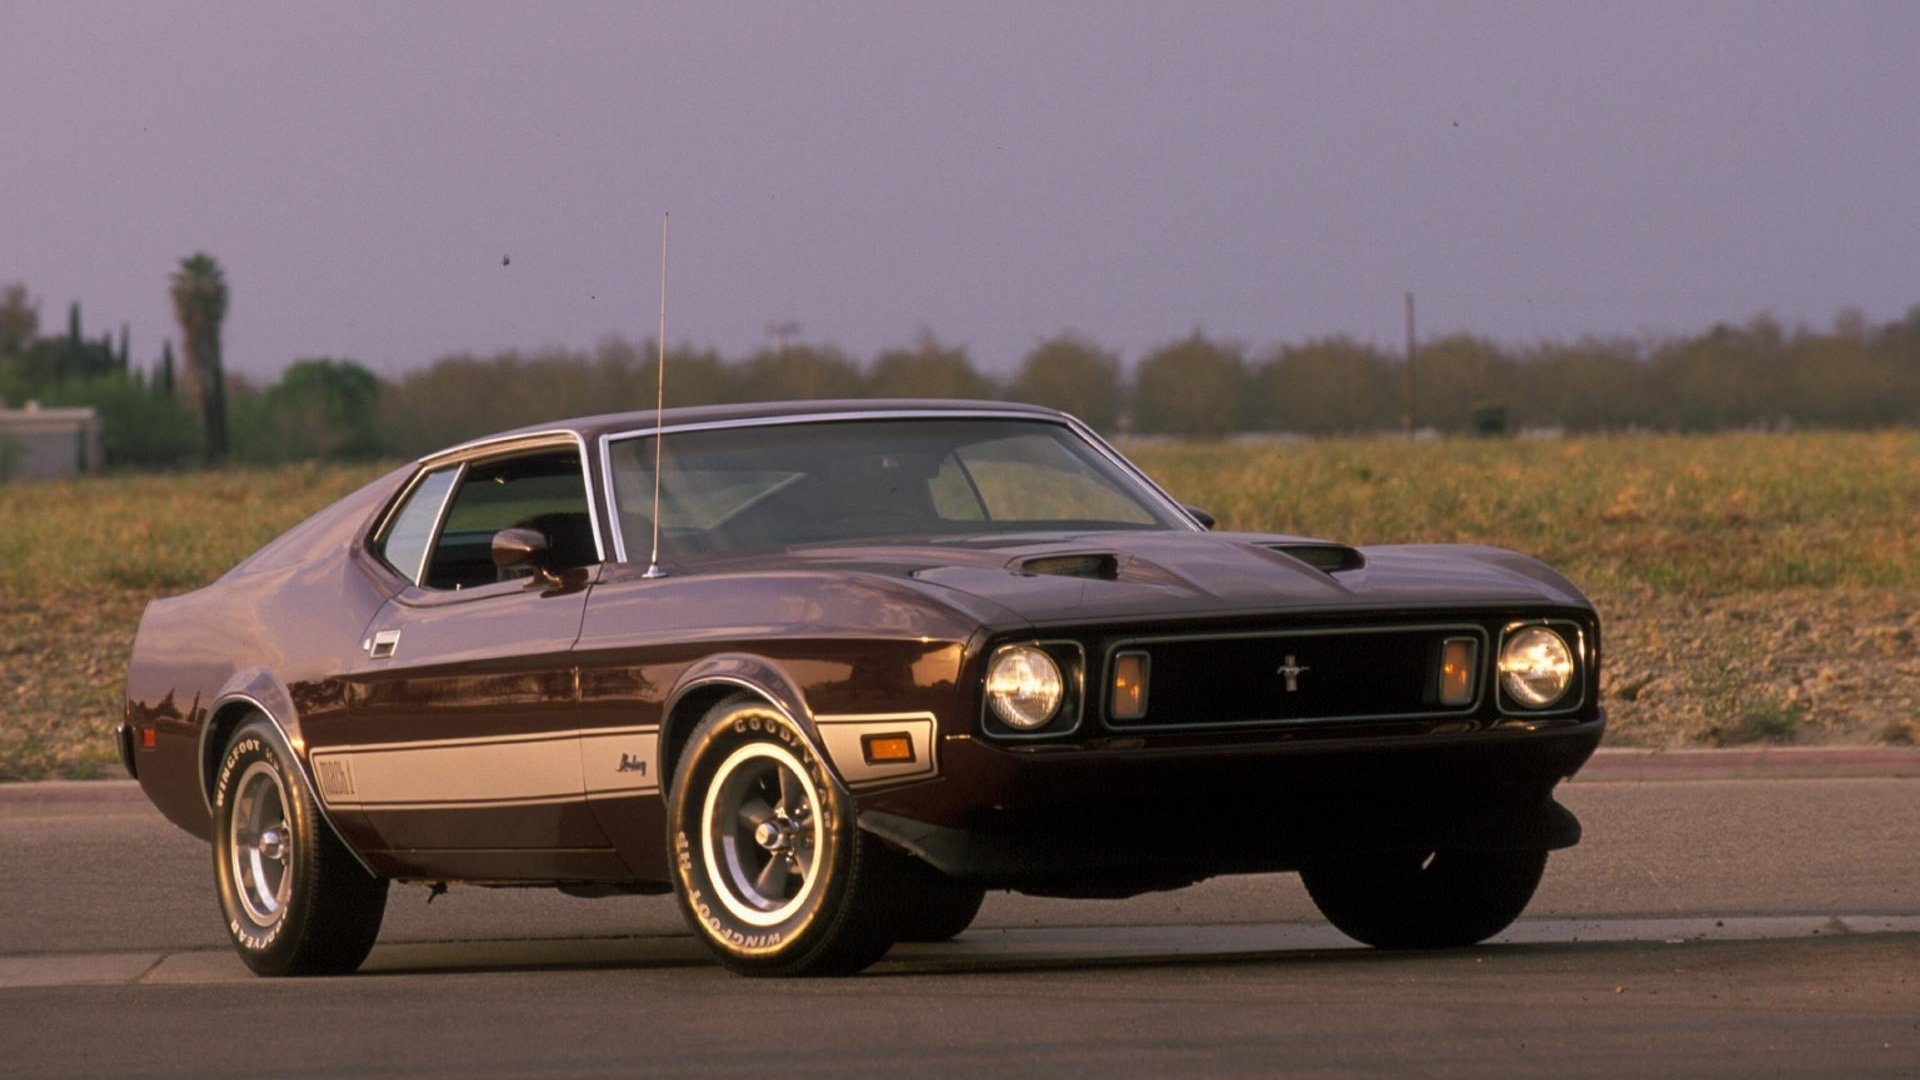 The 1973 Ford Mustang